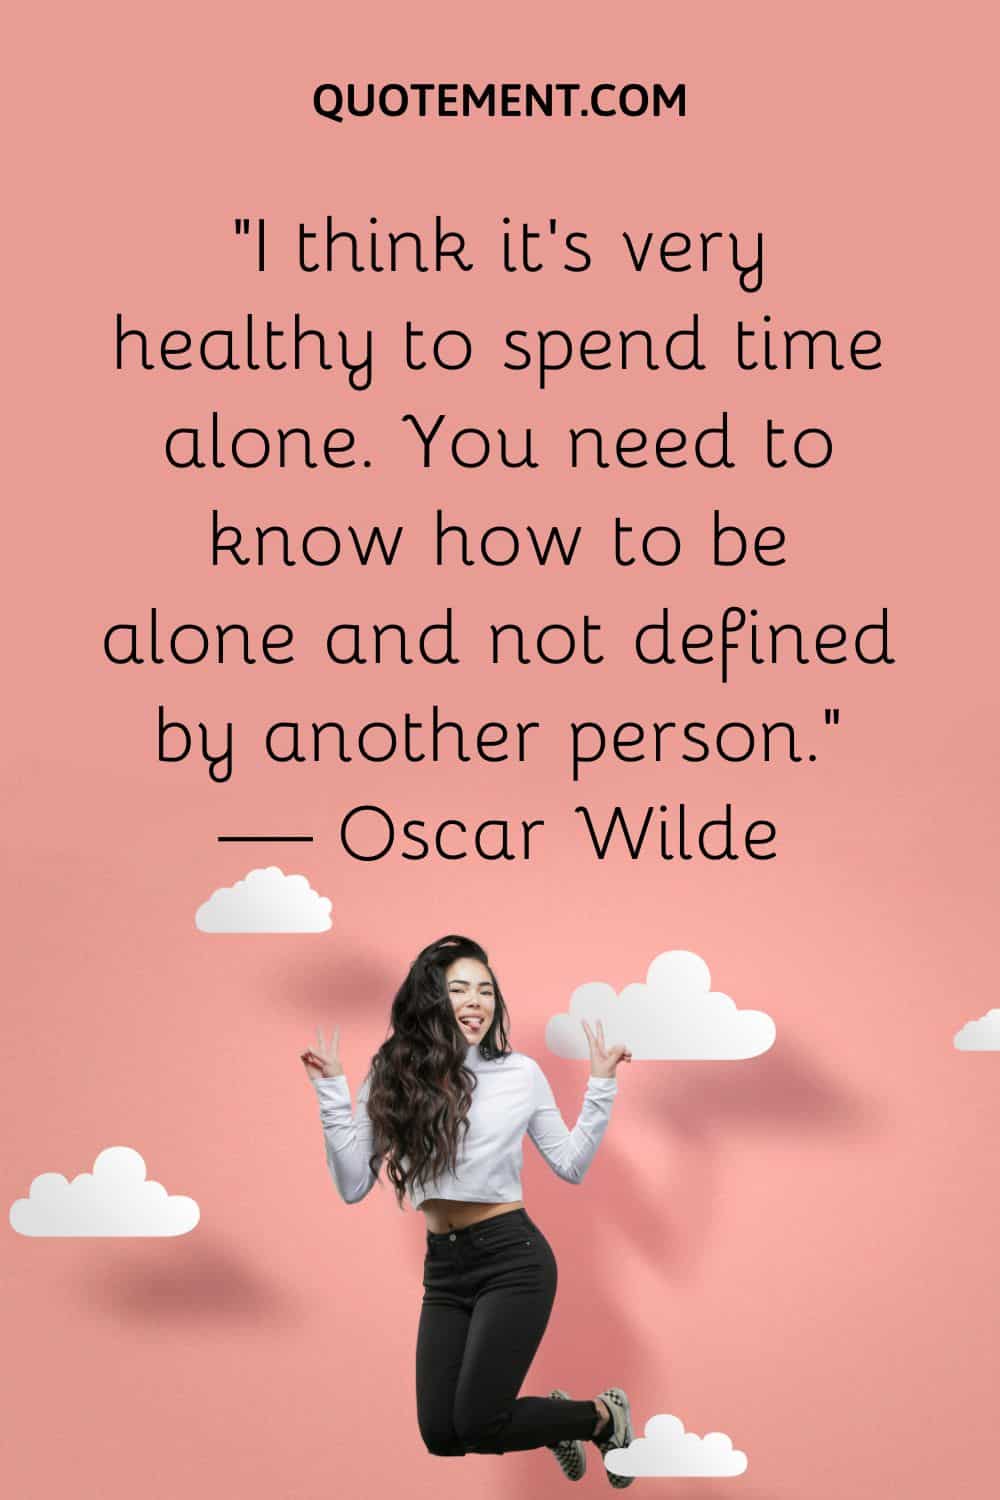 I think it’s very healthy to spend time alone